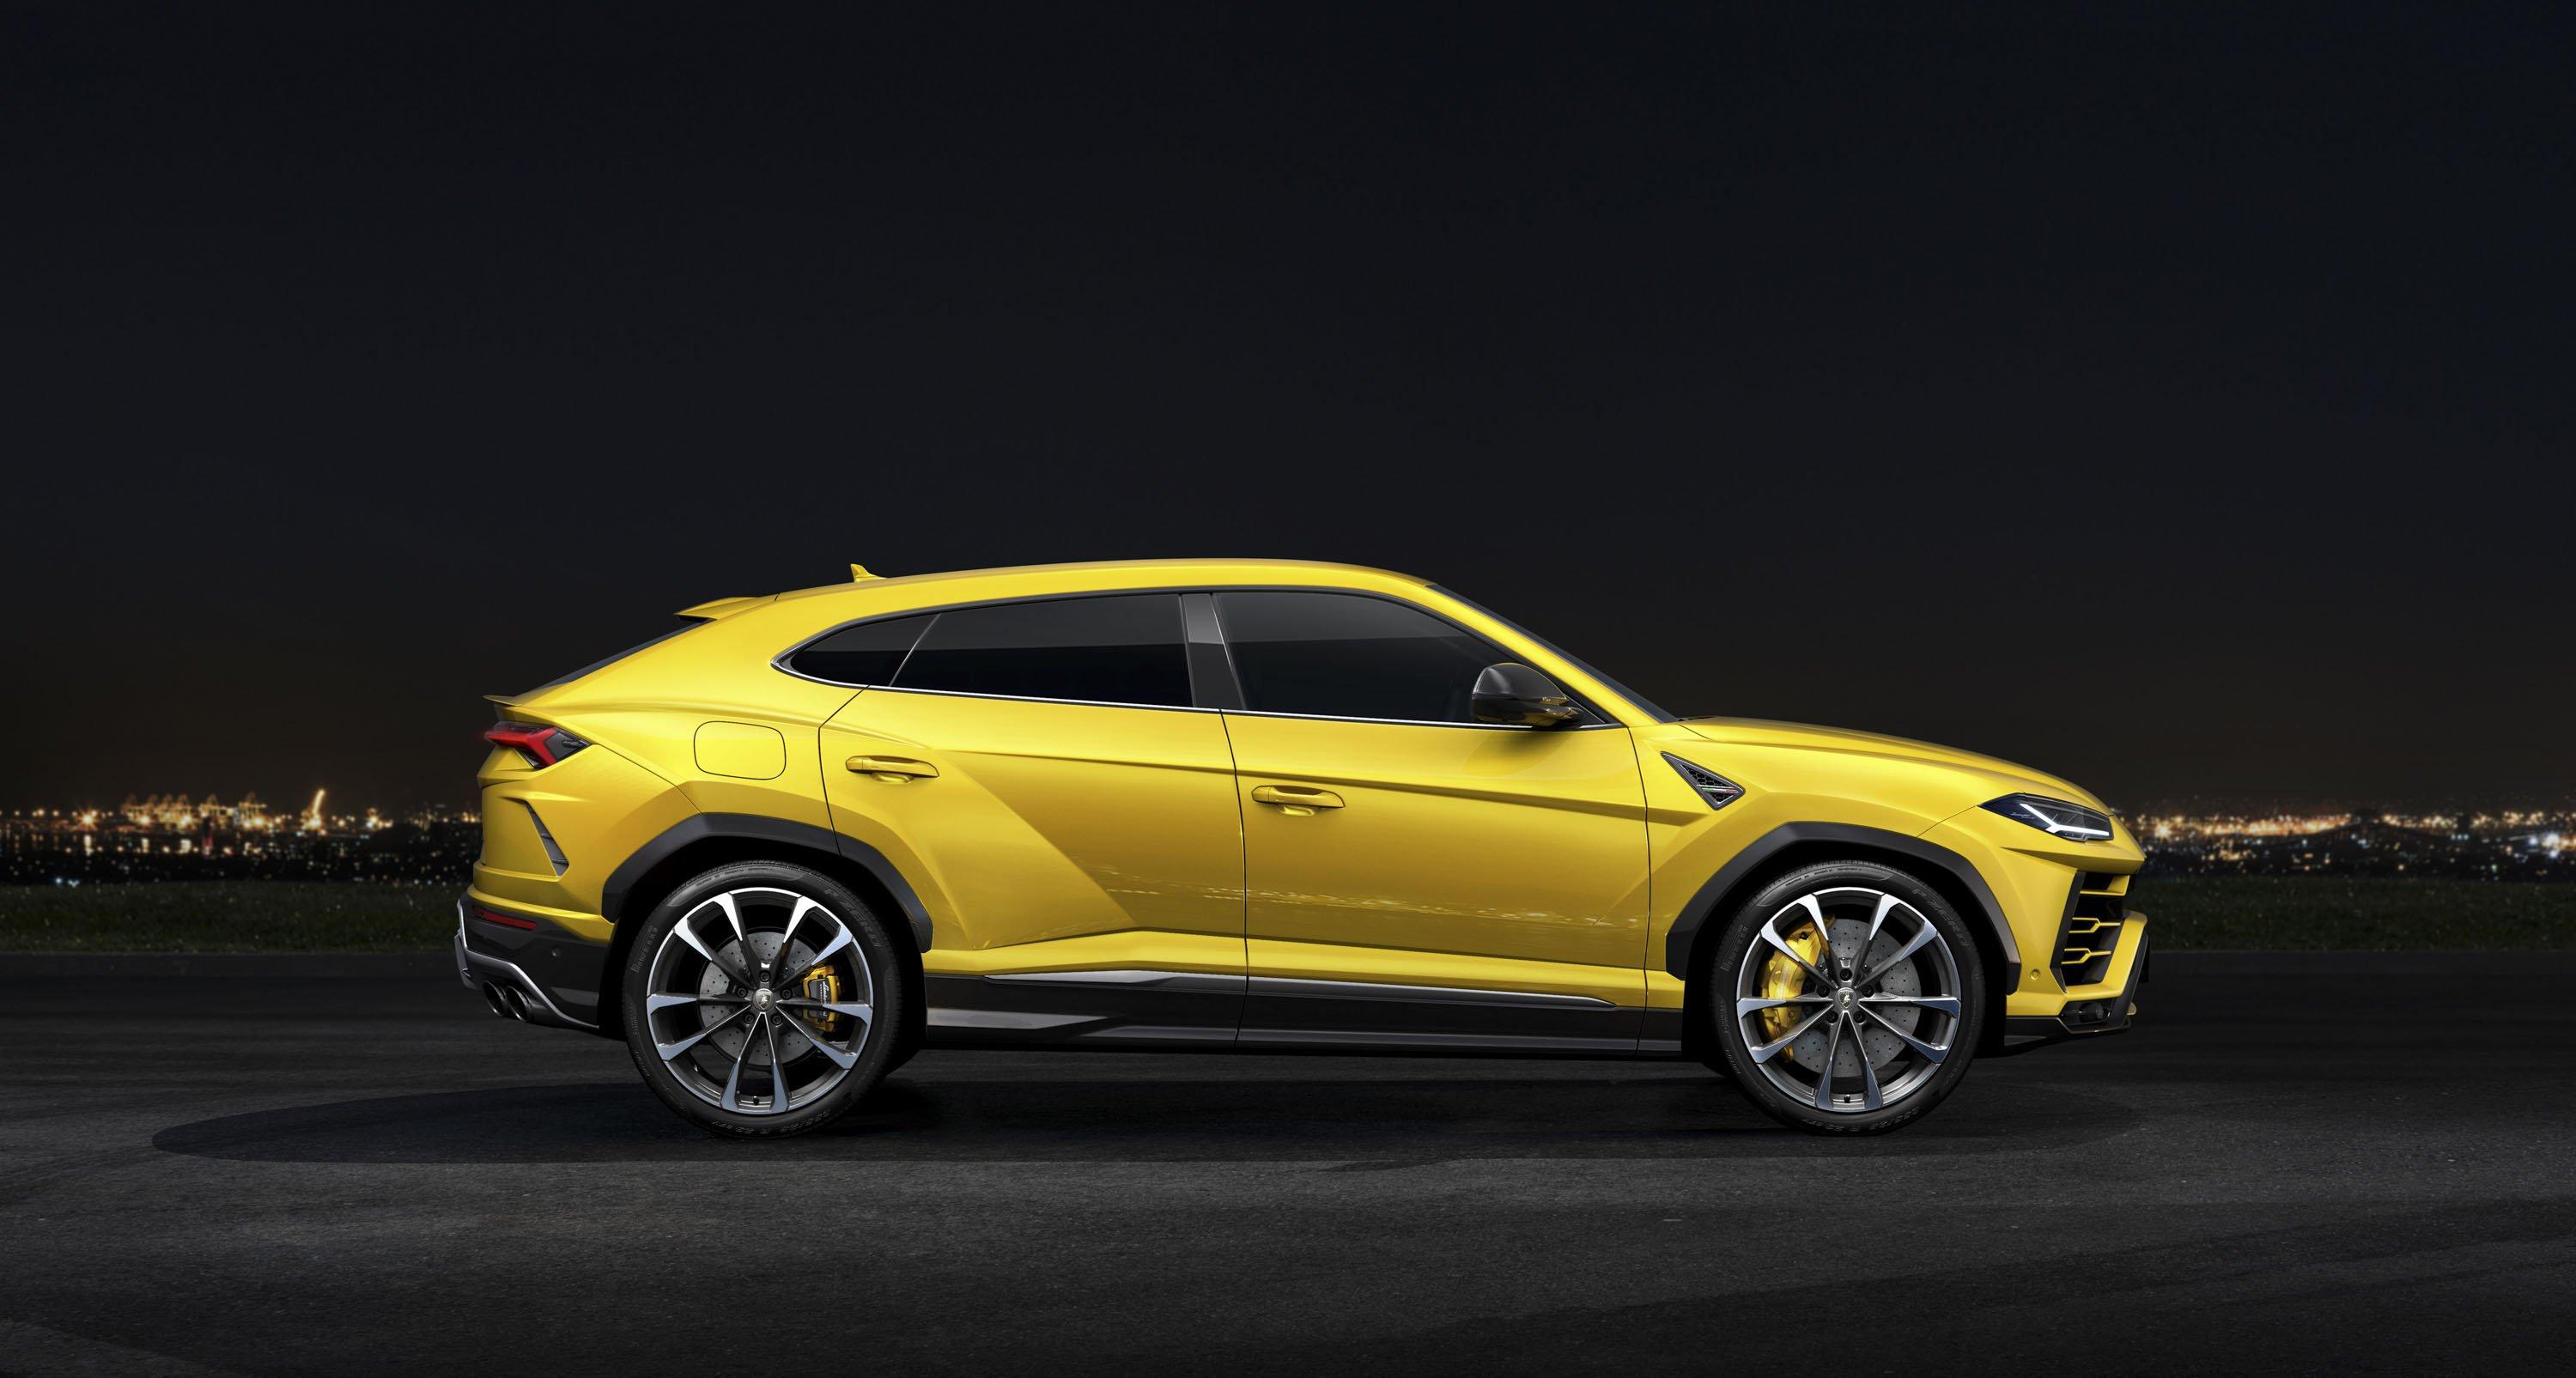 Lamborghini Urus: Latest News, Reviews, Specifications, Prices, Photo And Videos